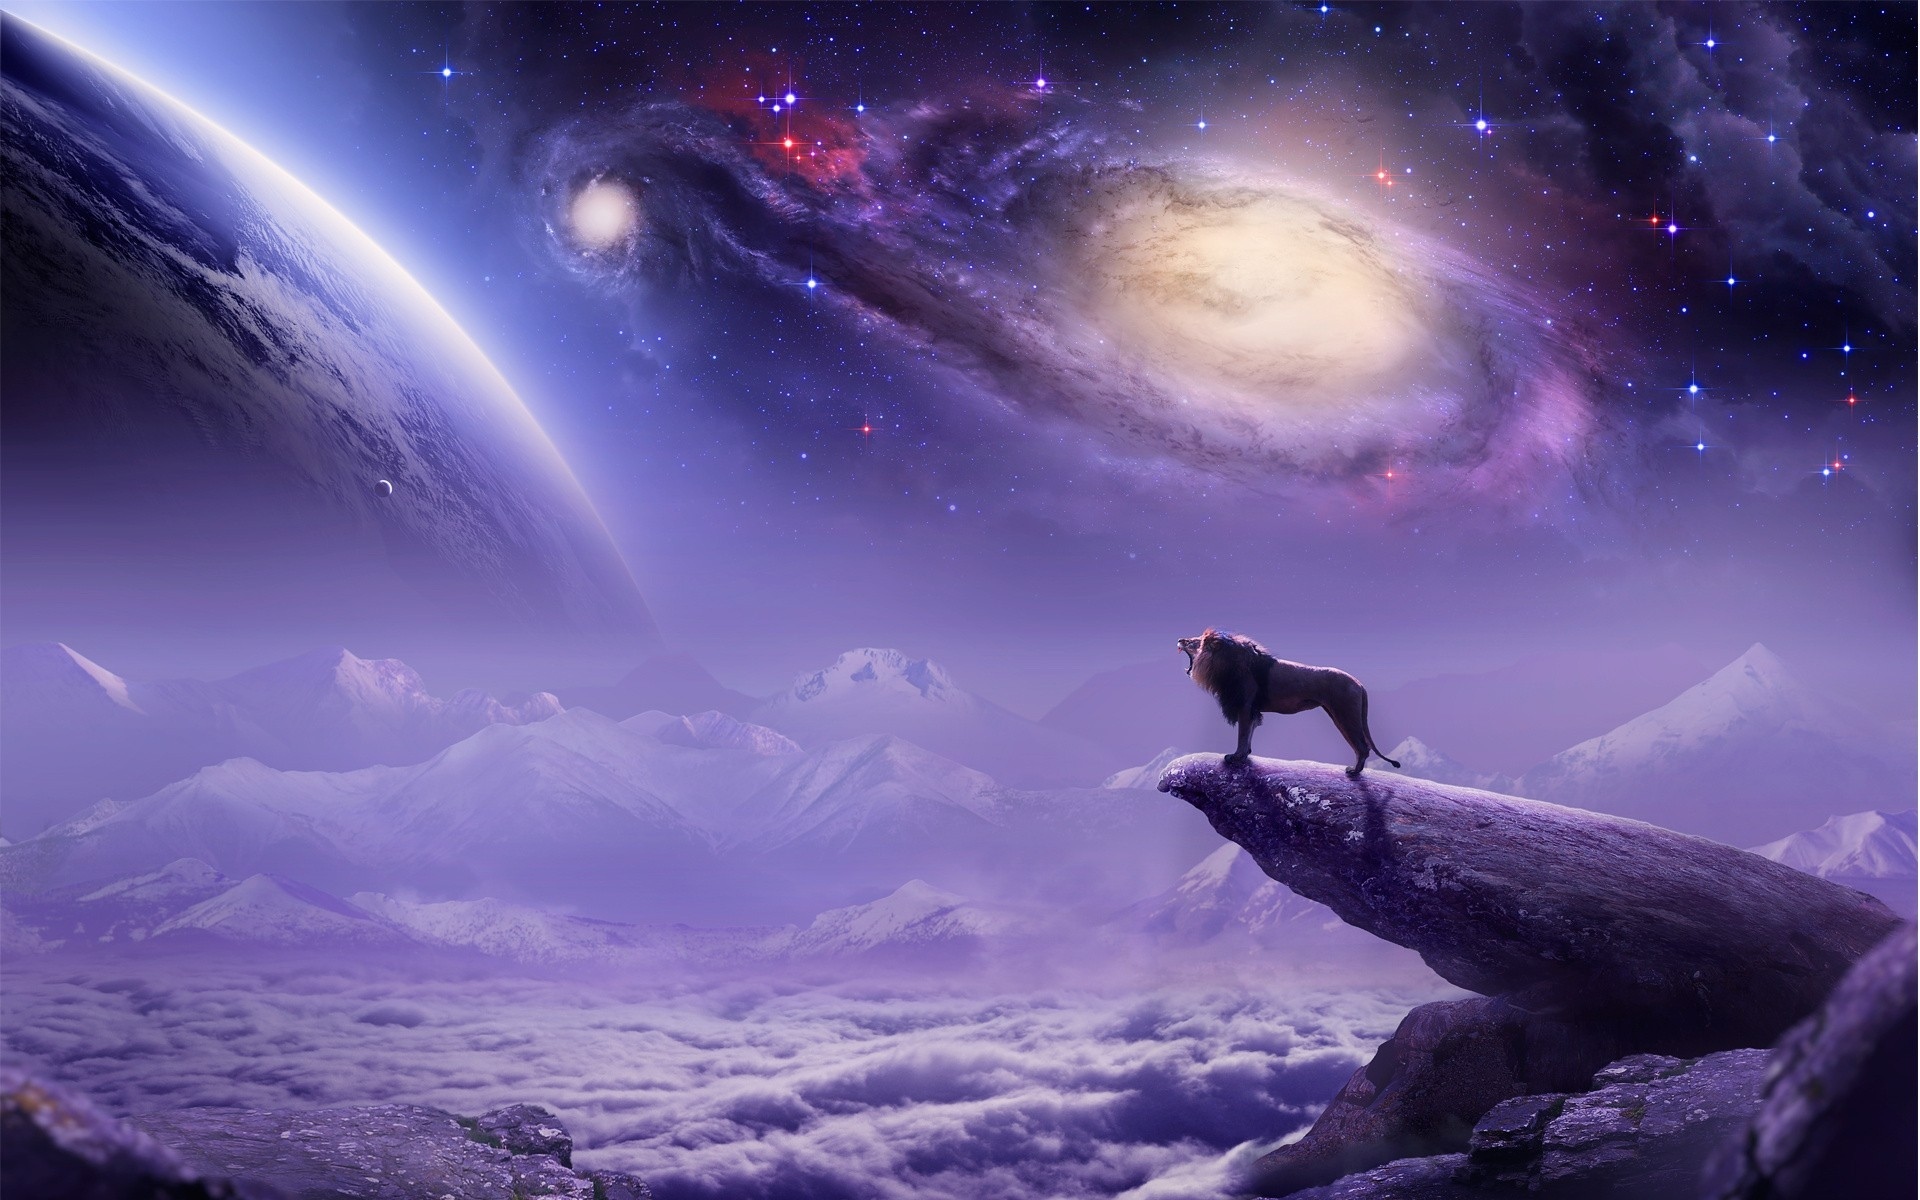 painting, Airbrushed, Digital art, Lion, Landscape, Mountains, Galaxy, Clouds Wallpaper